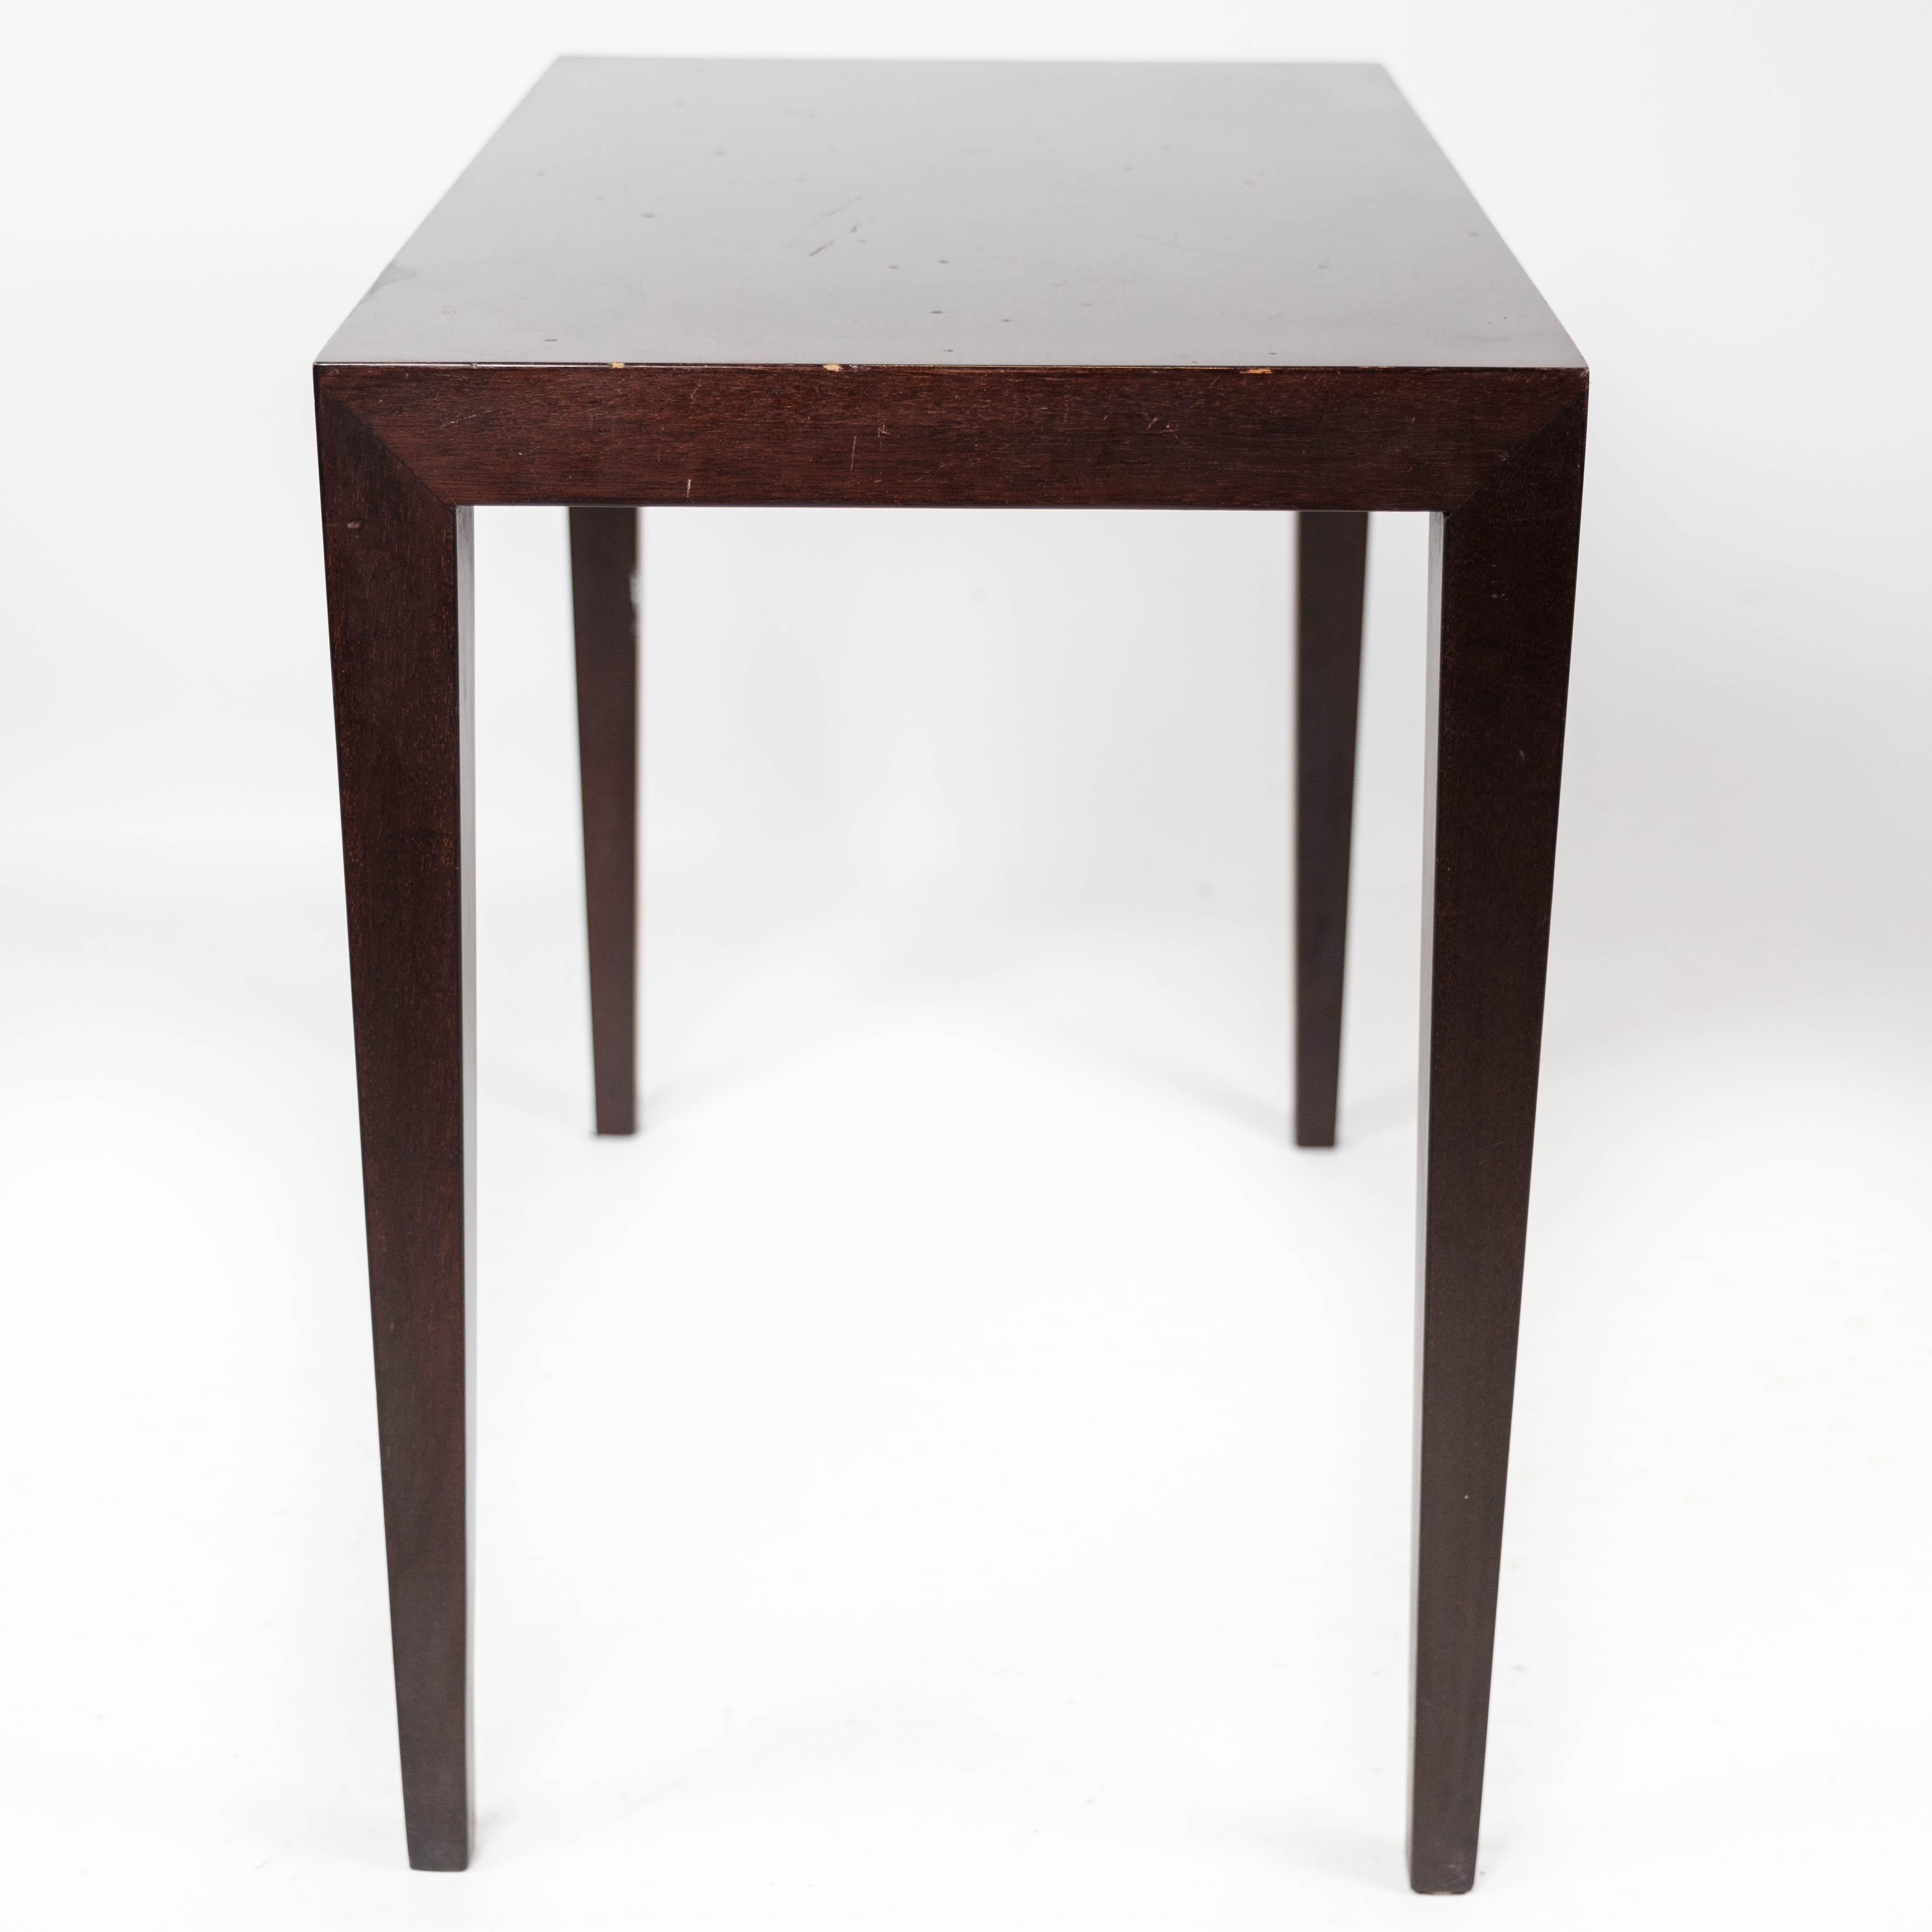 Mid-20th Century Side Table in Mahogany Designed by Severin Hansen for Haslev Furniture, 1960s For Sale